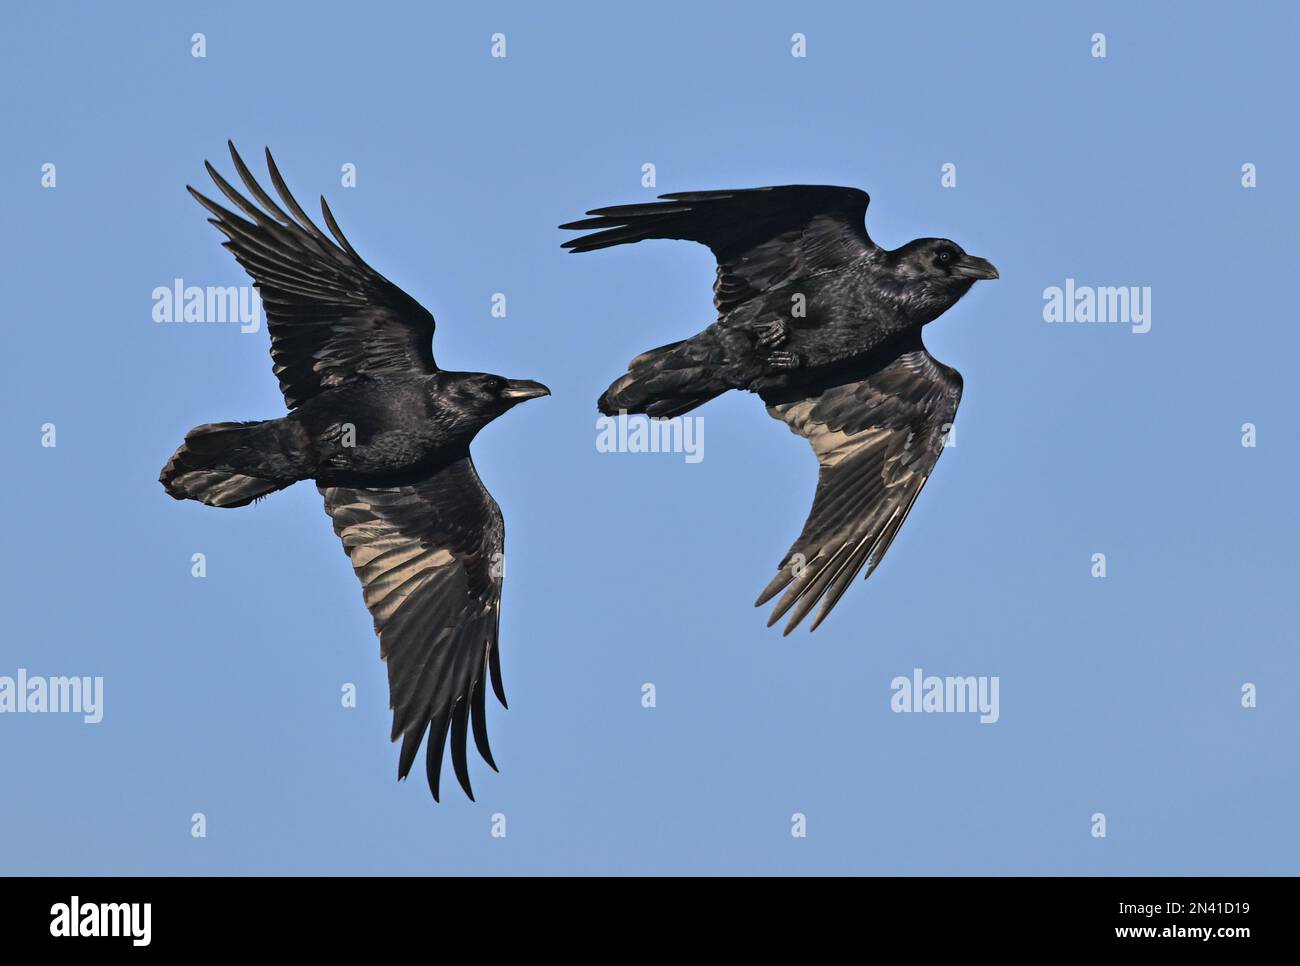 07 February 2023, Brandenburg, Groß Schönebeck: Two ravens (Corvus corax) fly in the blue sky above the Schorfheide Game Park. Common ravens are the largest of the corvids. The game park exclusively houses wild animal species that are or were native to the Schorfheide, such as otter, bison, red deer, fallow deer, wild boar, mouflon, wolf, elk and Przewalski's horse. The park covers an area of about 100 hectares and has a 7-kilometer trail system. Photo: Patrick Pleul/dpa/ZB Stock Photo